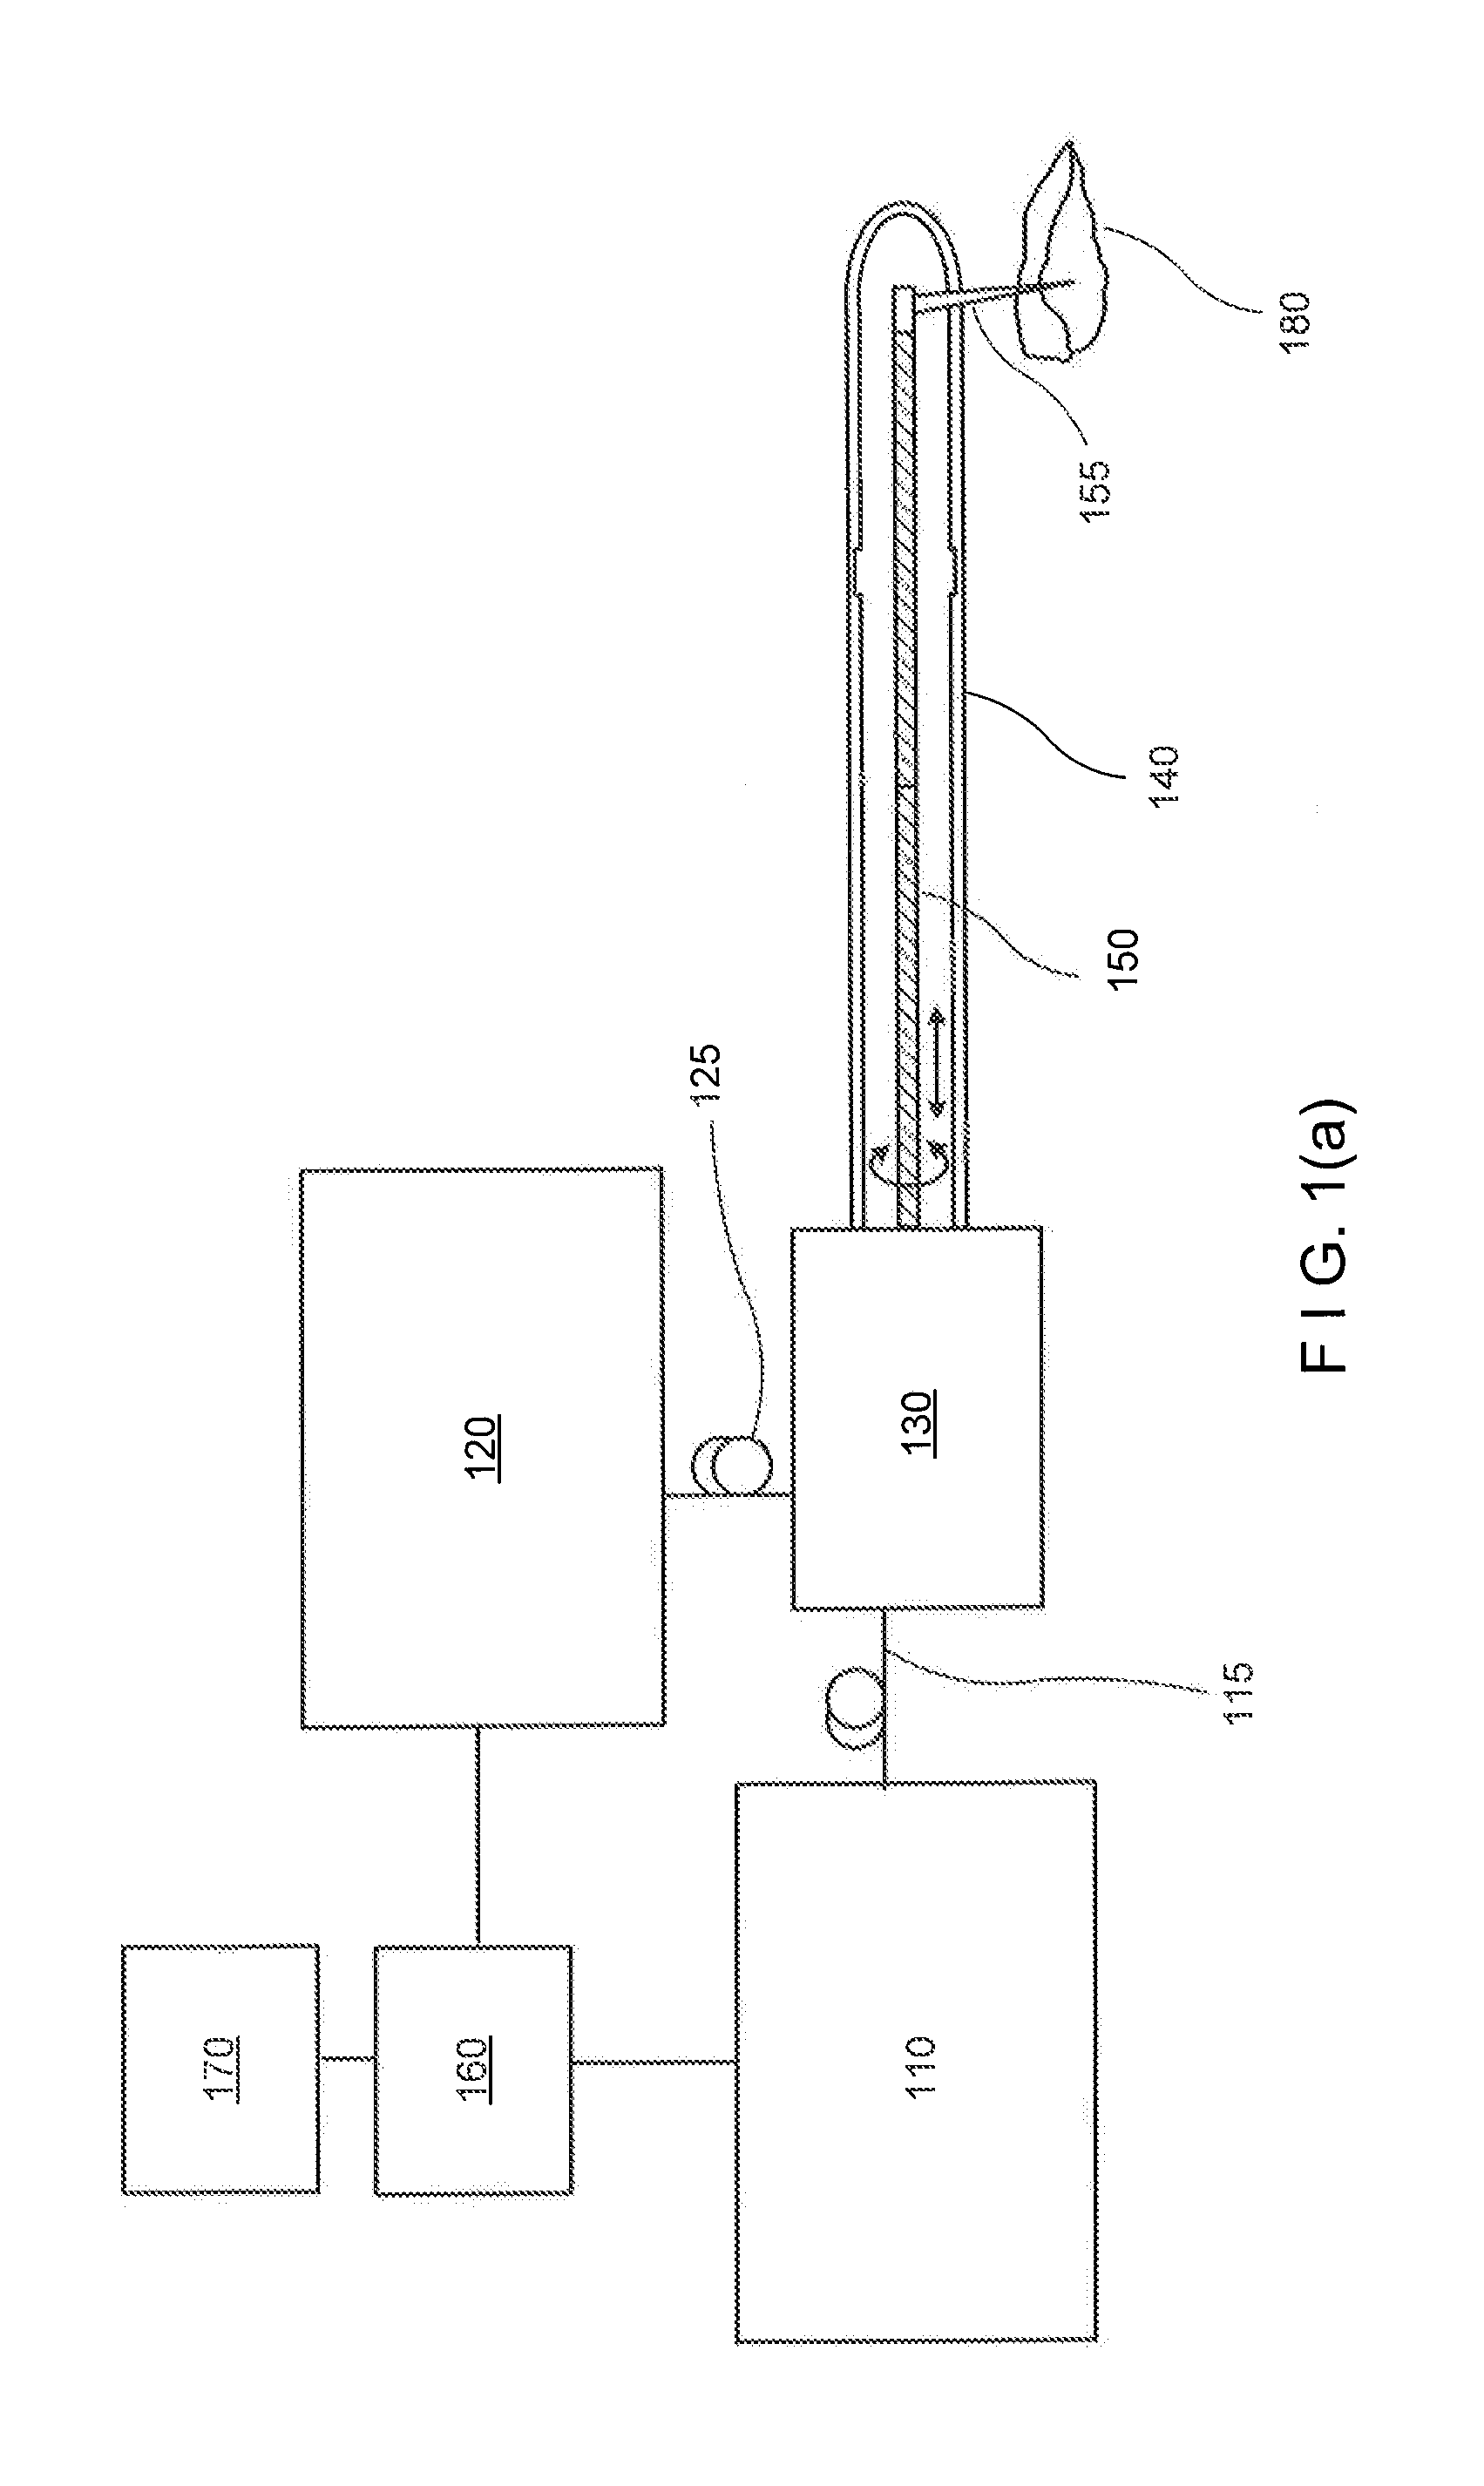 Systems, devices, methods, apparatus and computer-accessible media for providing optical imaging of structures and compositions